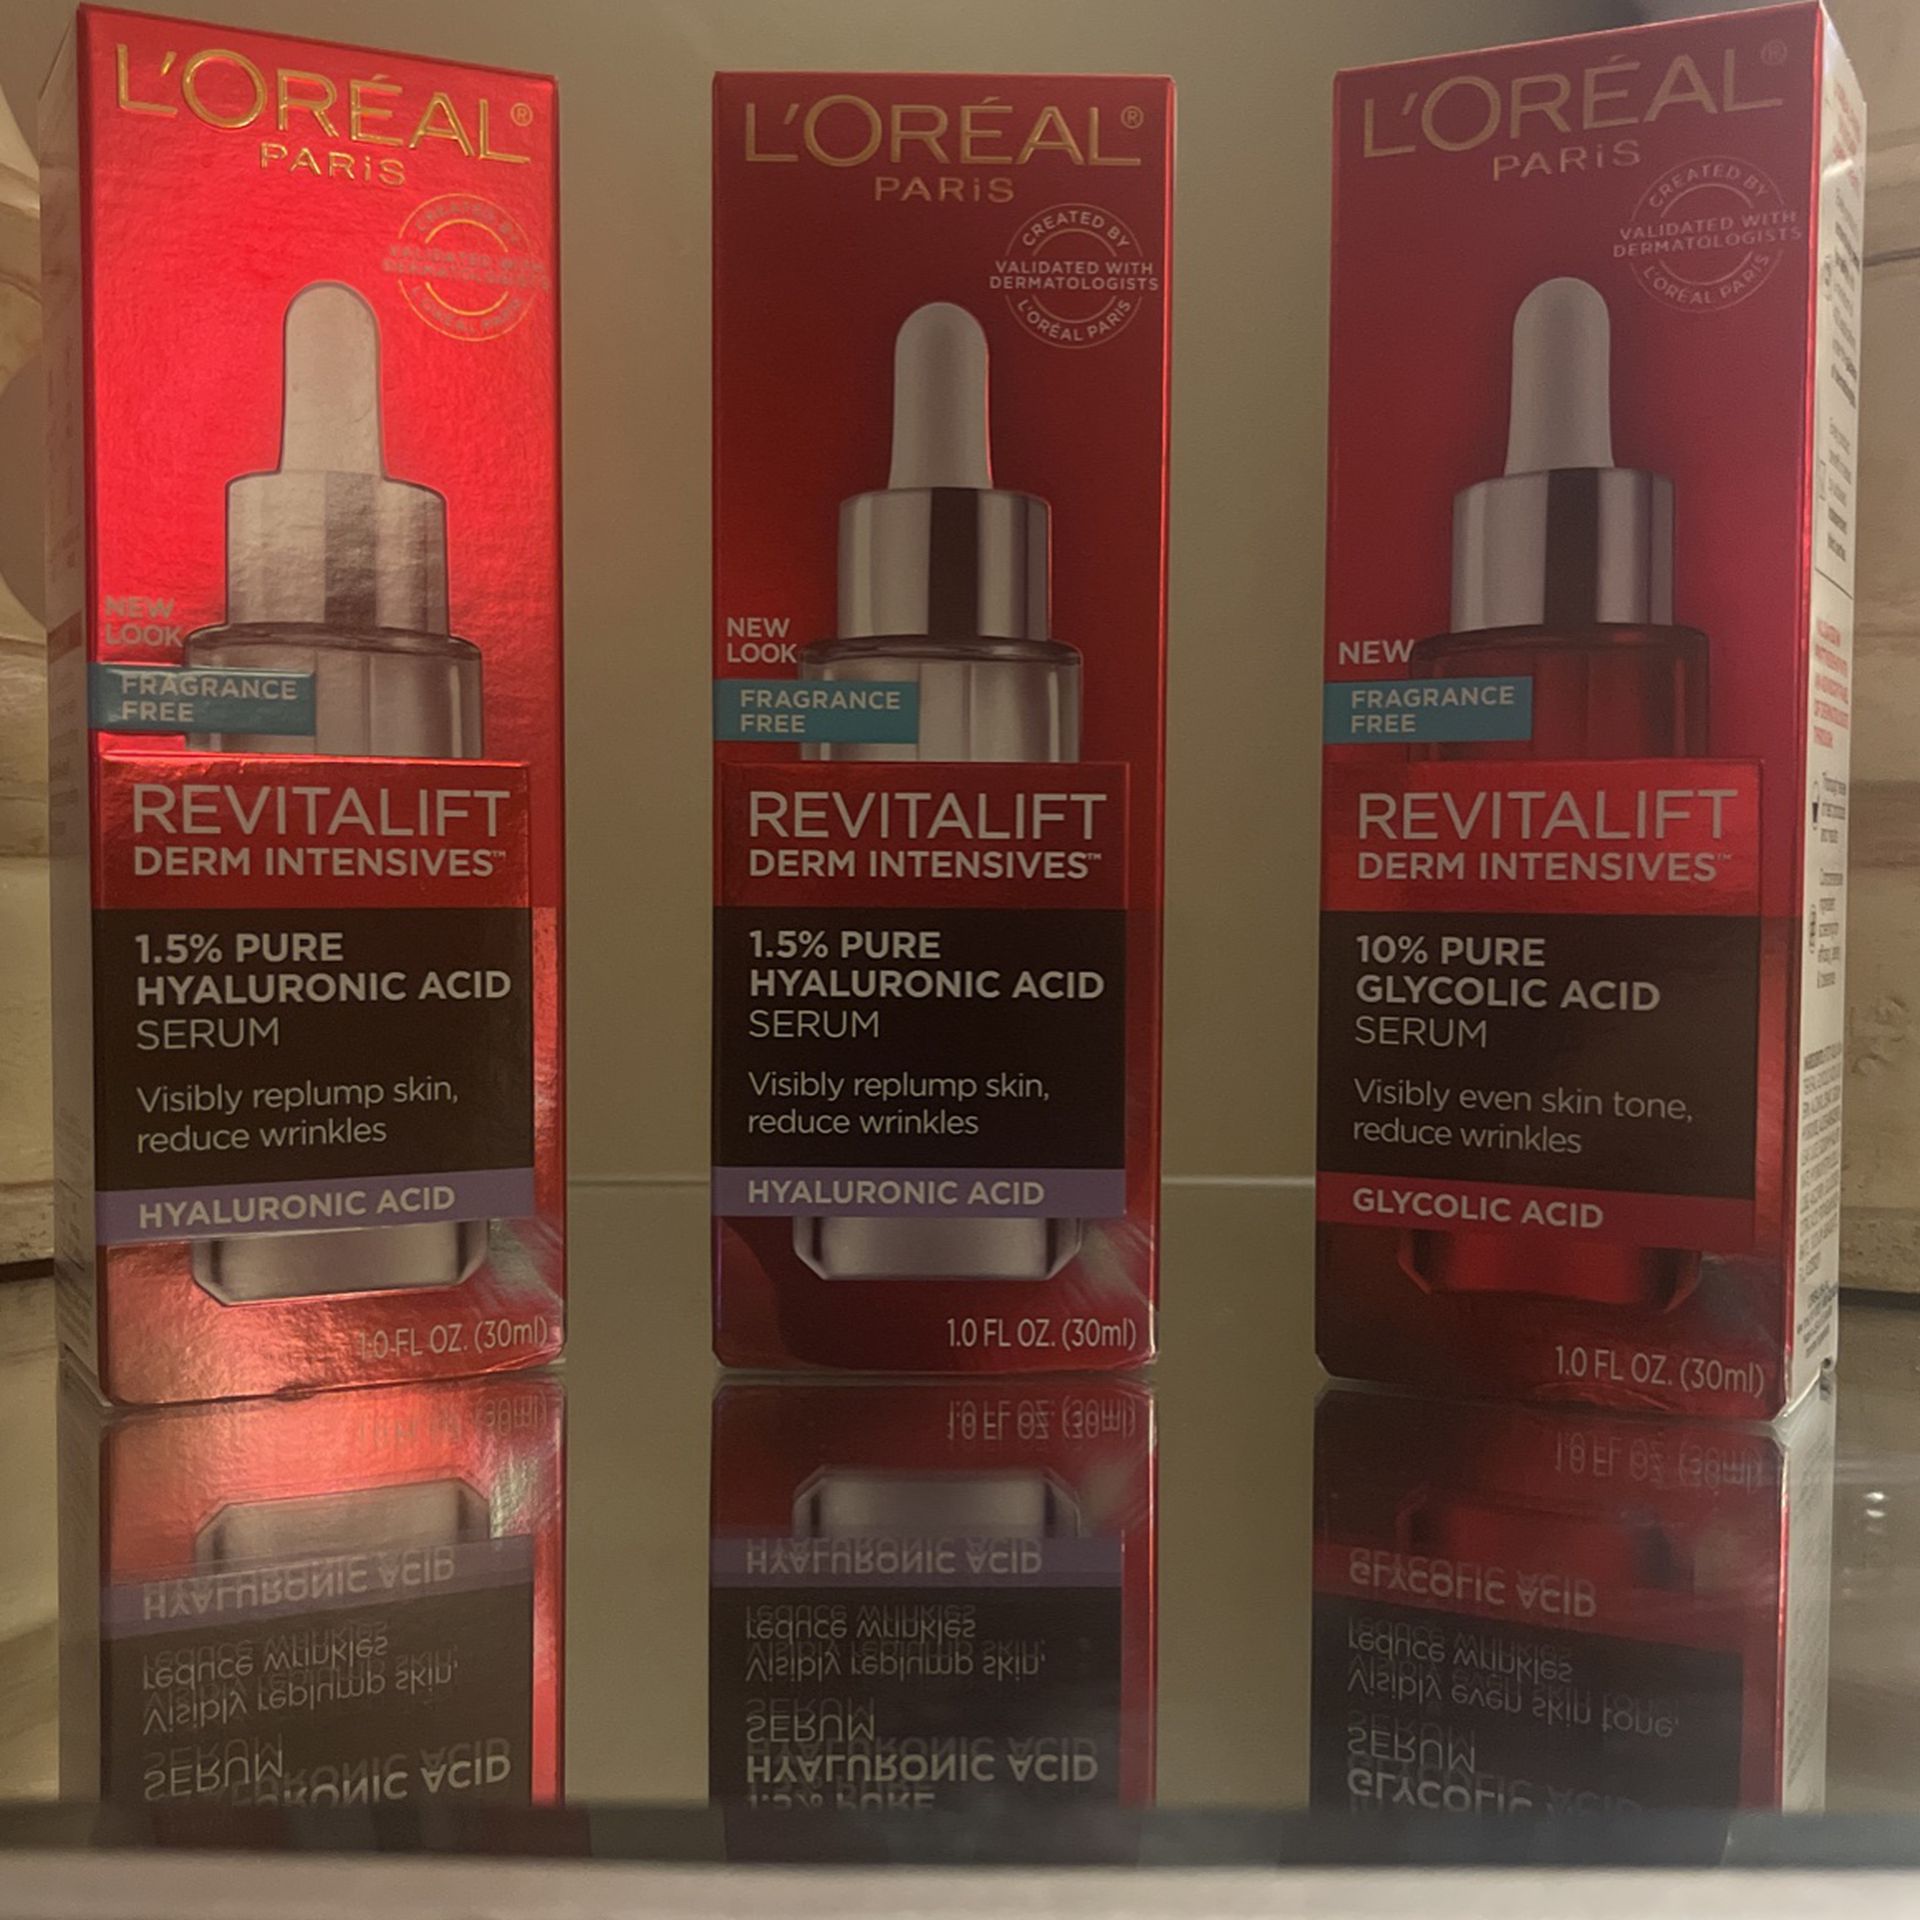 L’Oréal Revitalift Derm Intensives … Visibly Reduce Wrinkles And Replump Skin